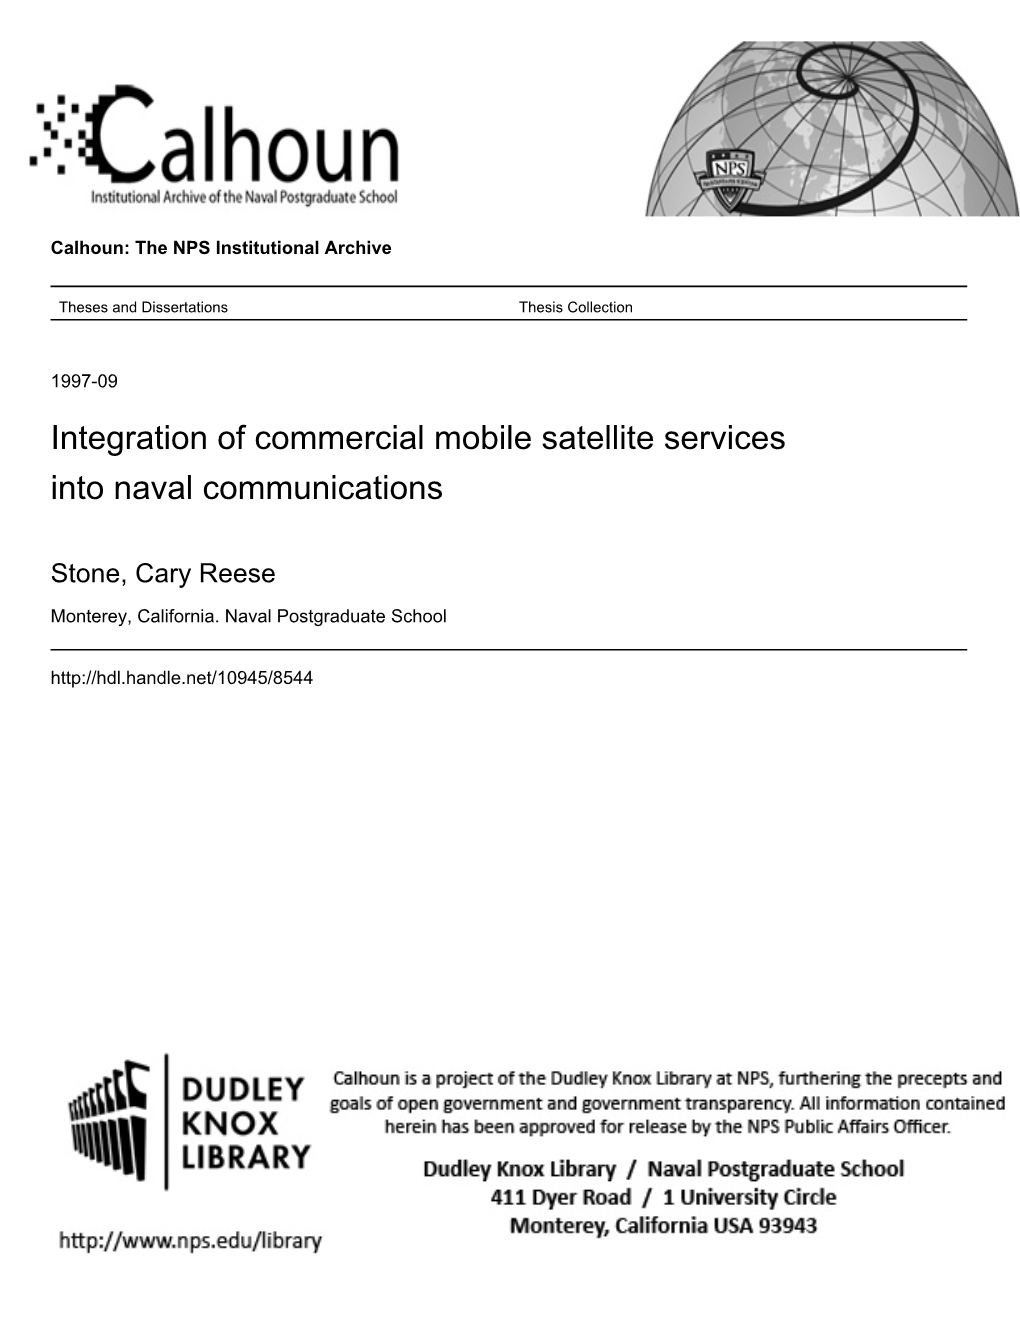 Integration of Commercial Mobile Satellite Services Into Naval Communications